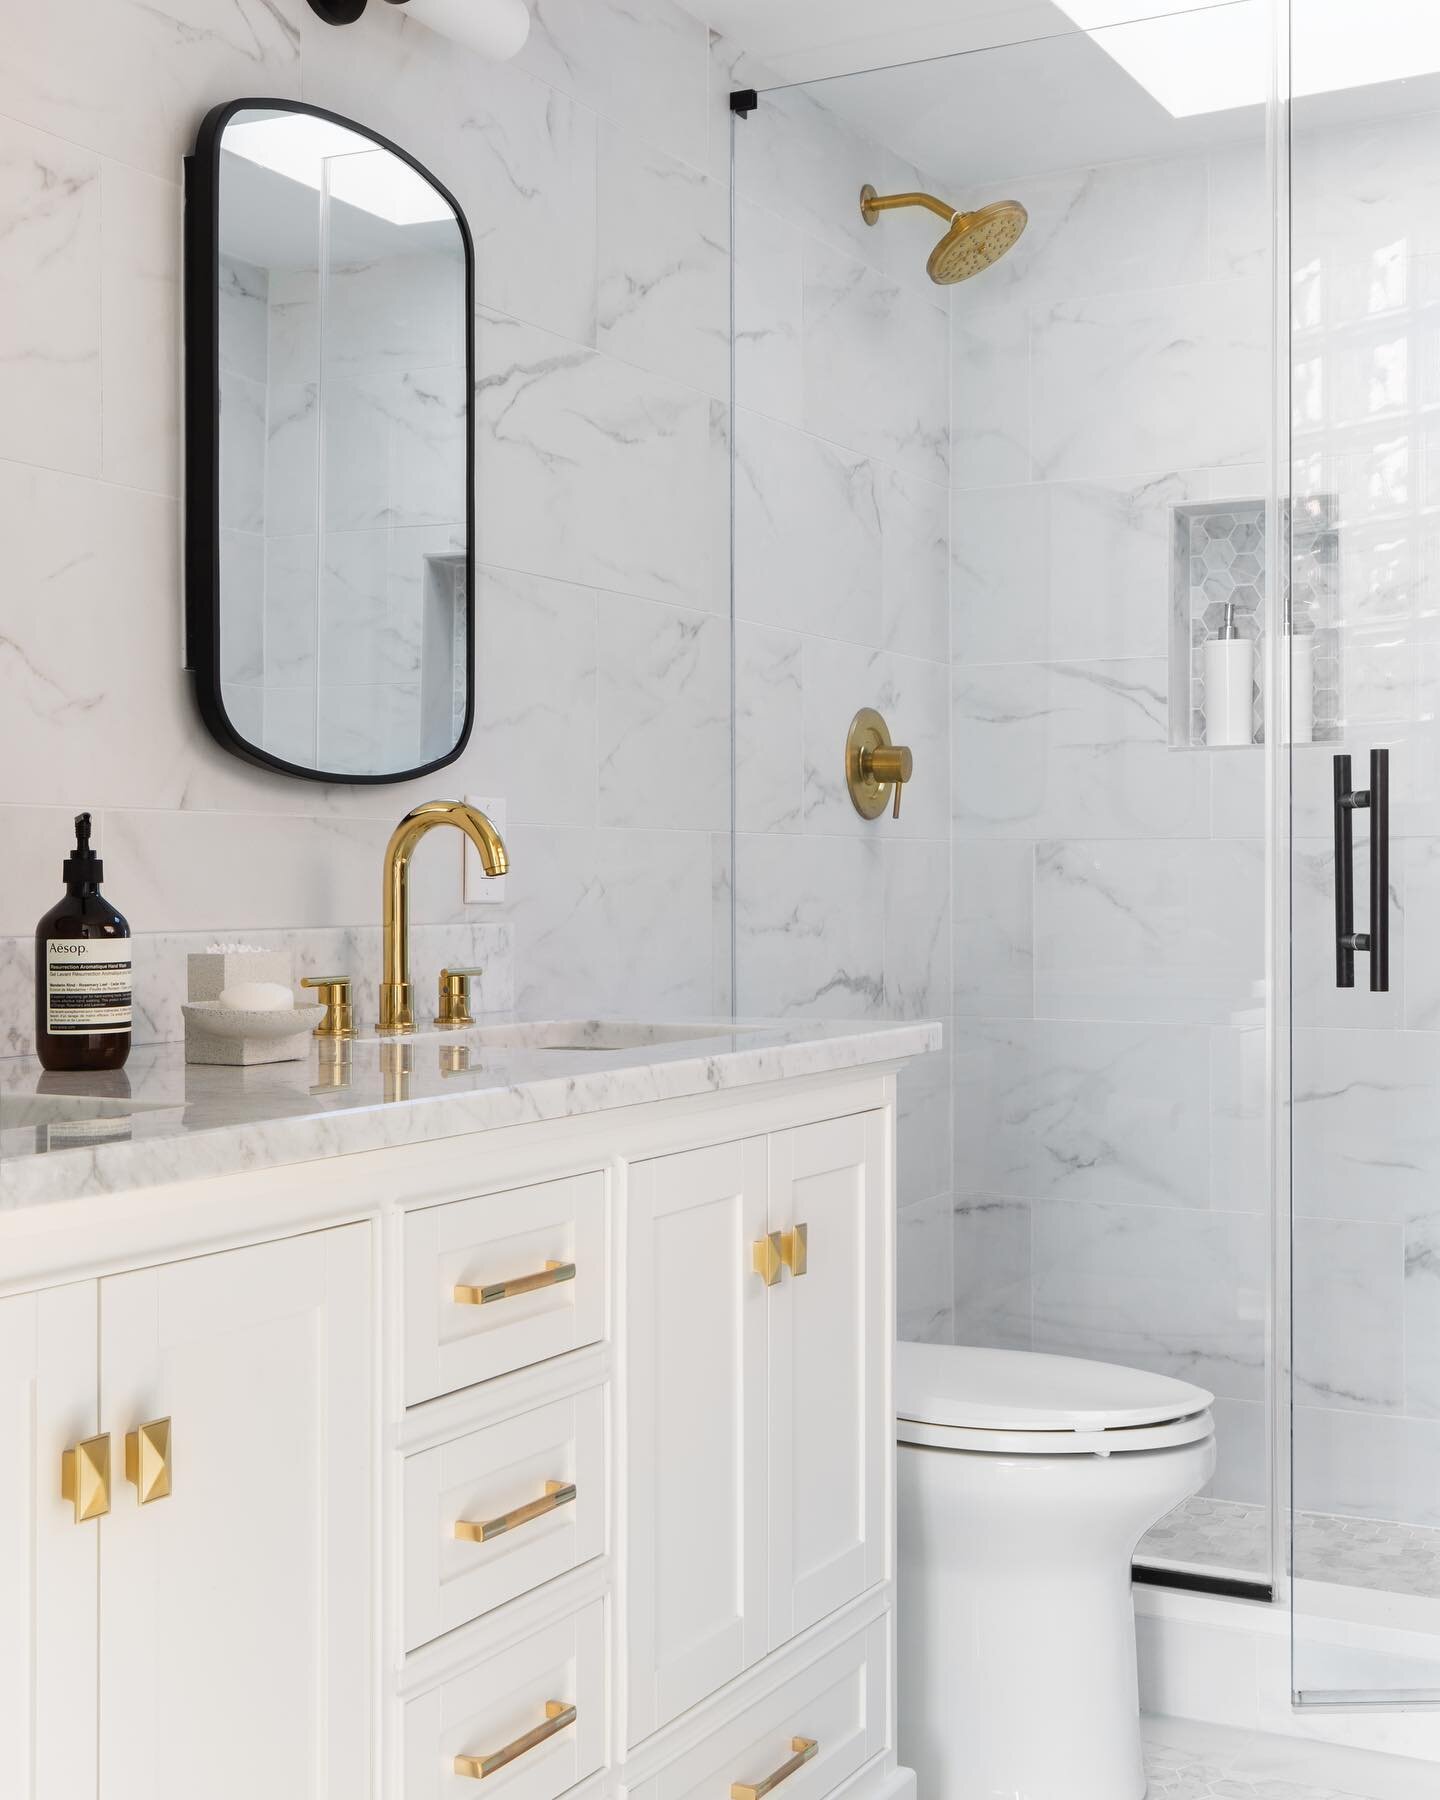 We were going for maximum tranquility in this bathroom reno with clean white hues, touches of brass hardware, and marble tile. Can&rsquo;t you just feel the serenity washing over you?! 🚿
Design by us @pistachiobyelaine 
Photo by @jacquelineclairinte